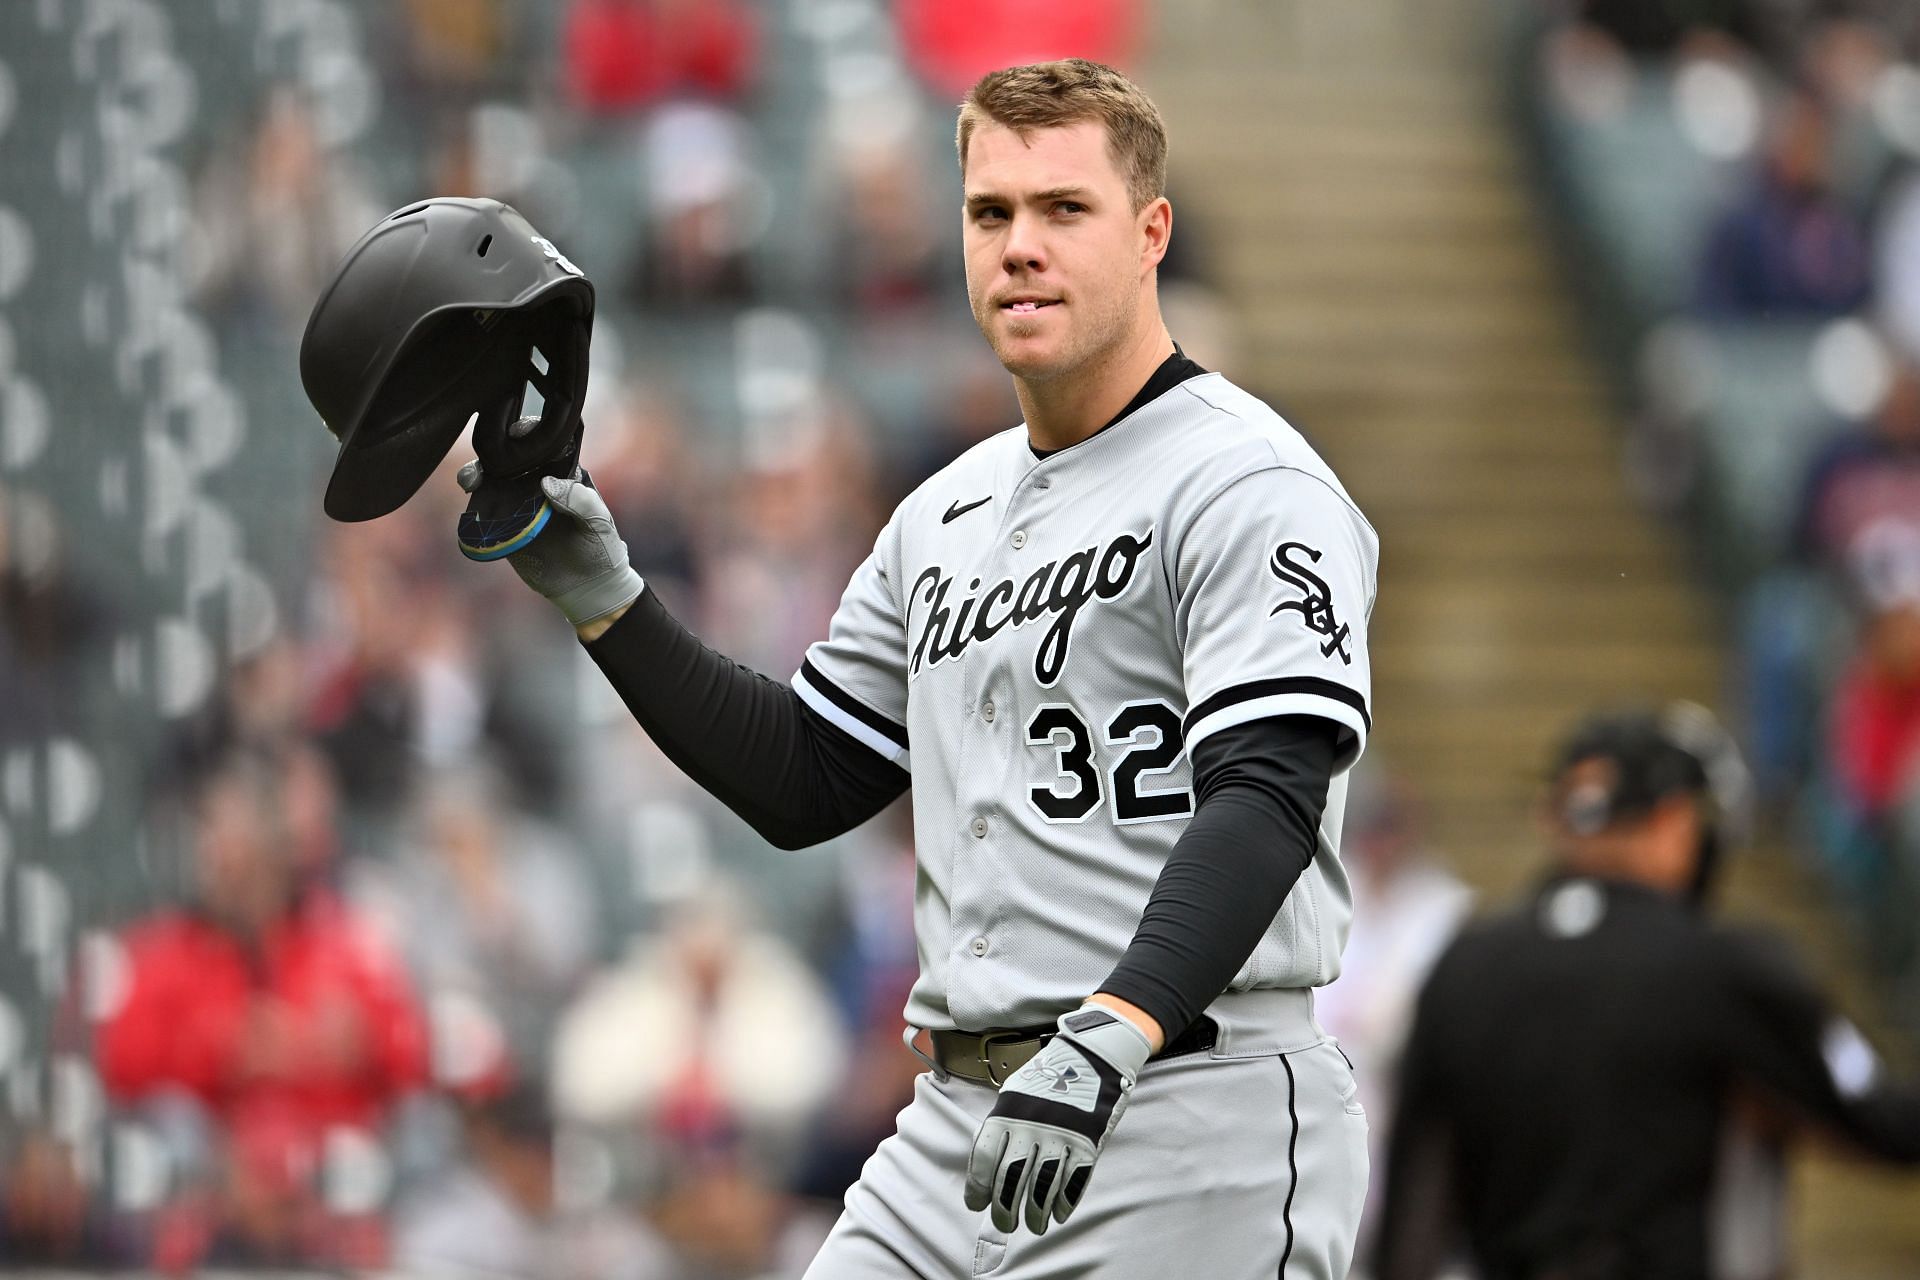 Chicago White Sox right fielder Gavin Sheets made an error on Monday that caused a commentator to swear on live television.